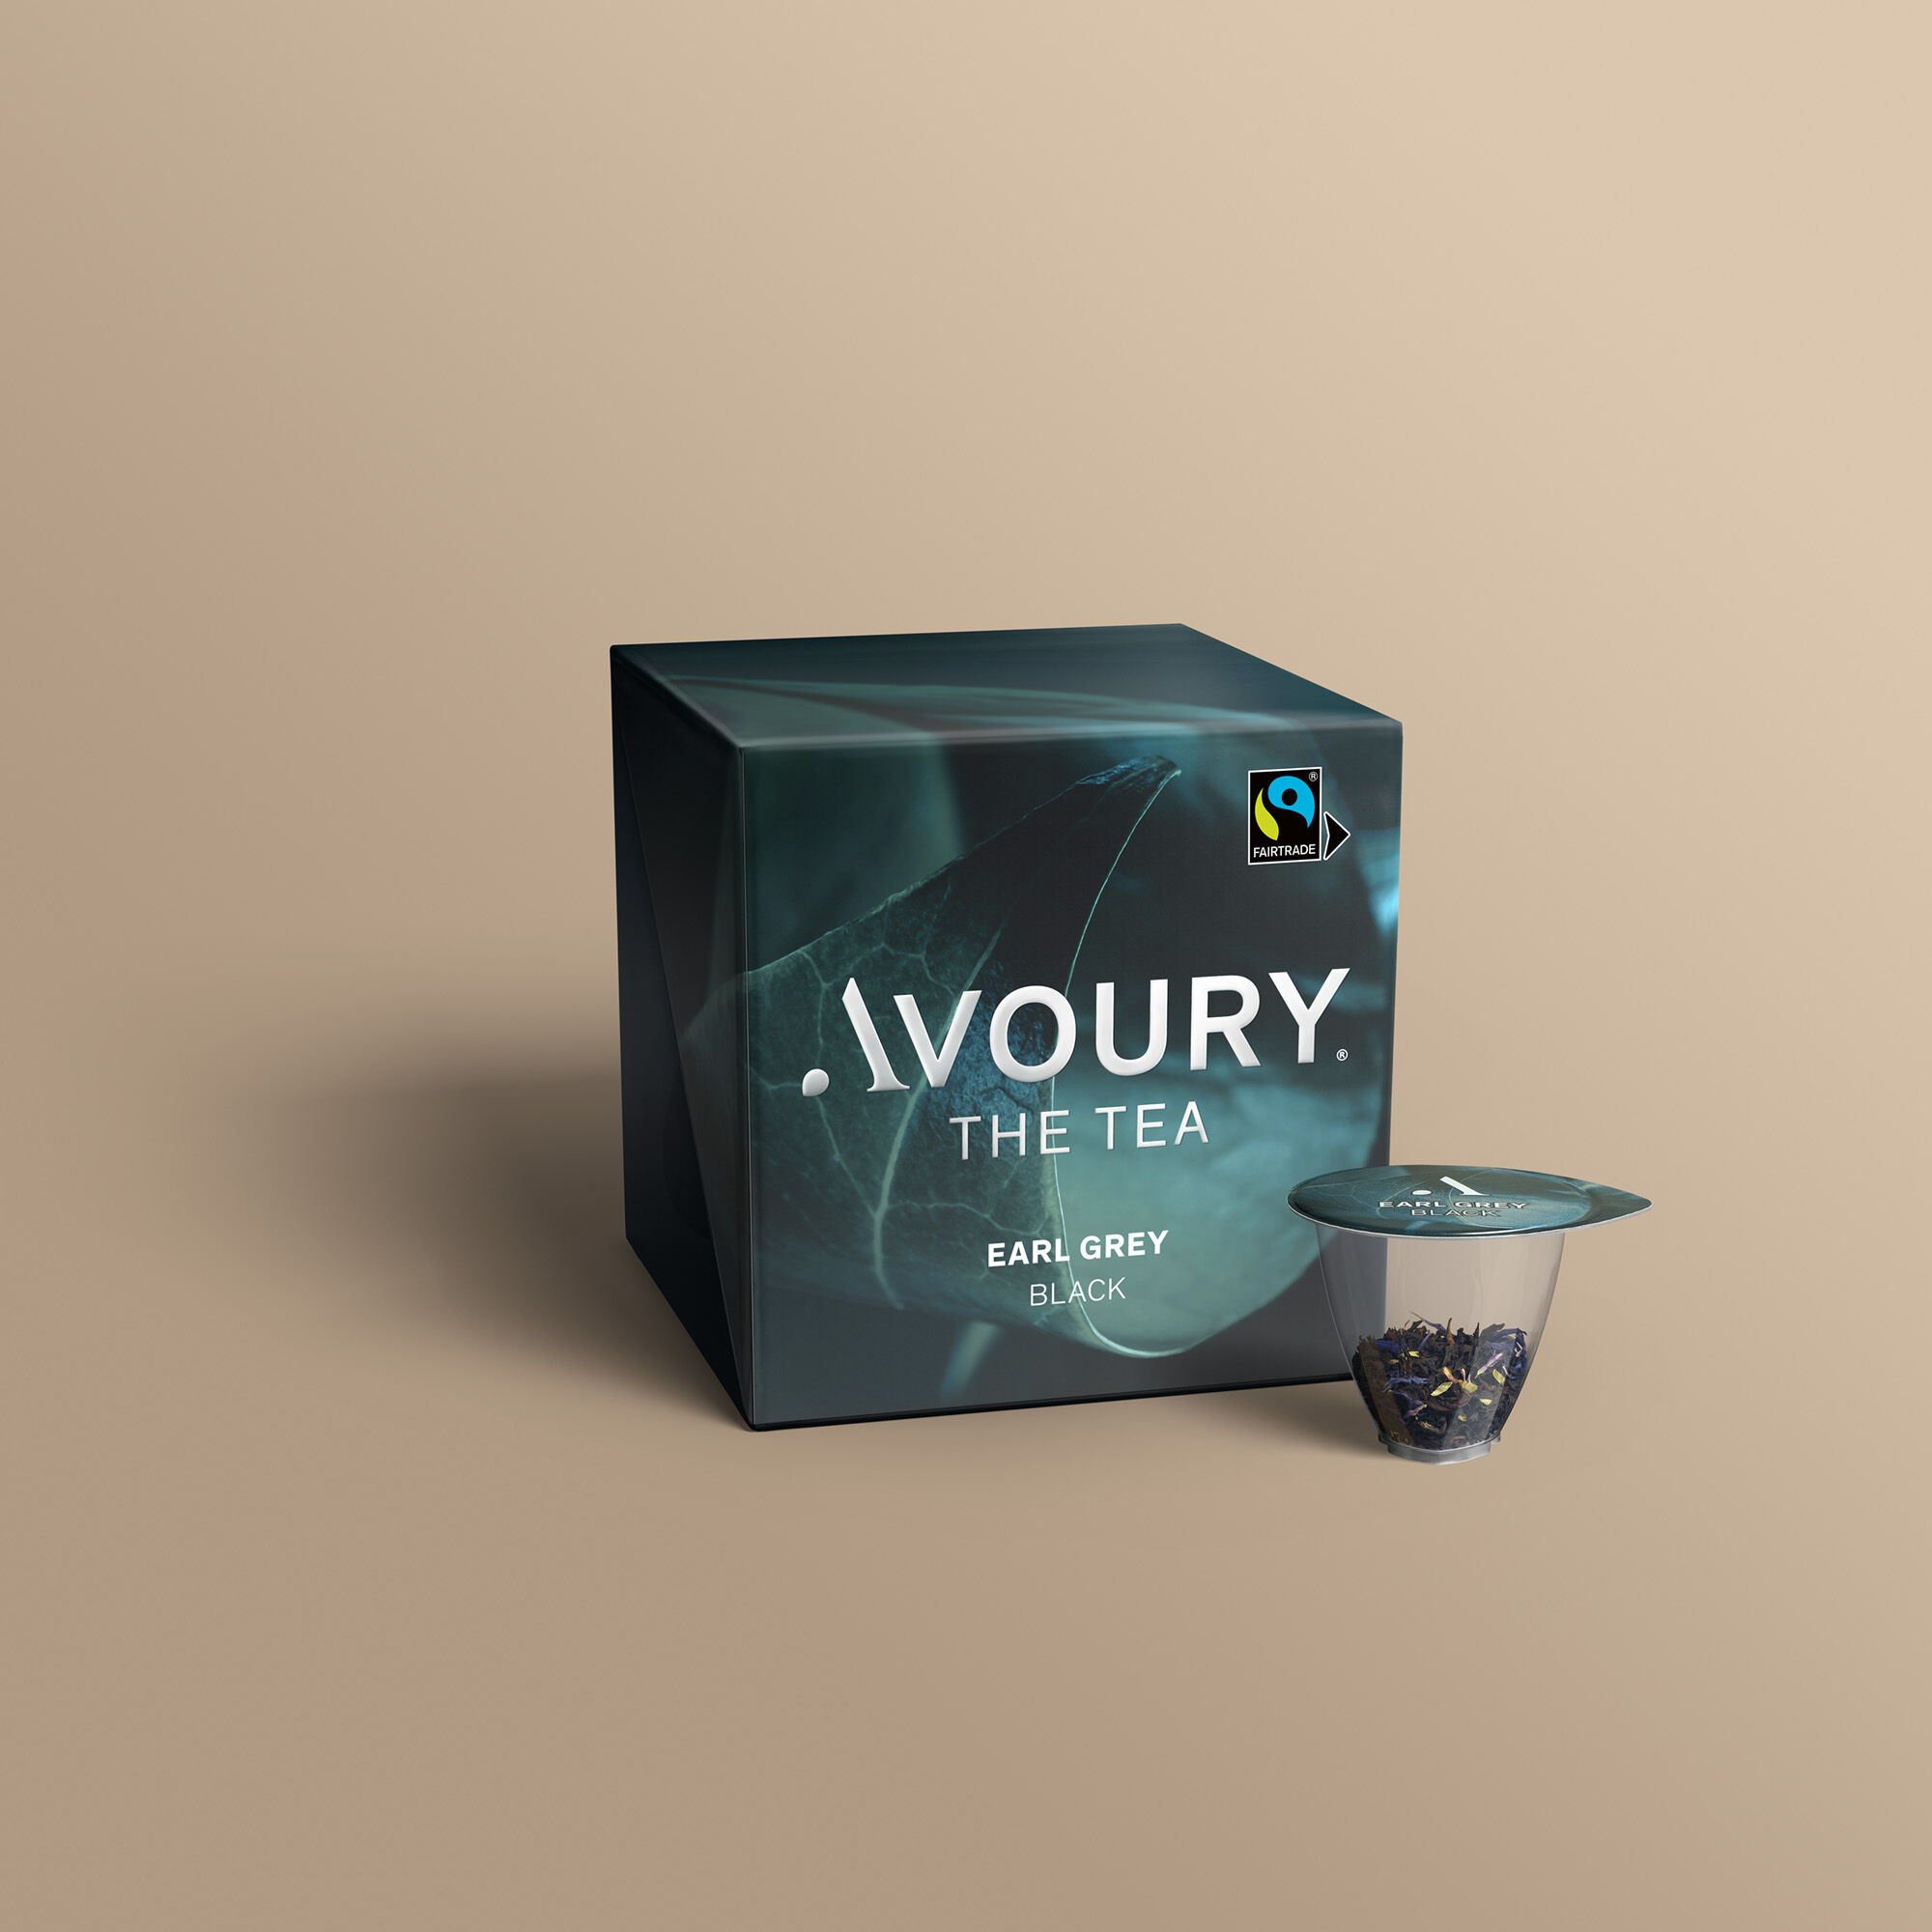 Avoury EARL GREY with Fairtrade Seal